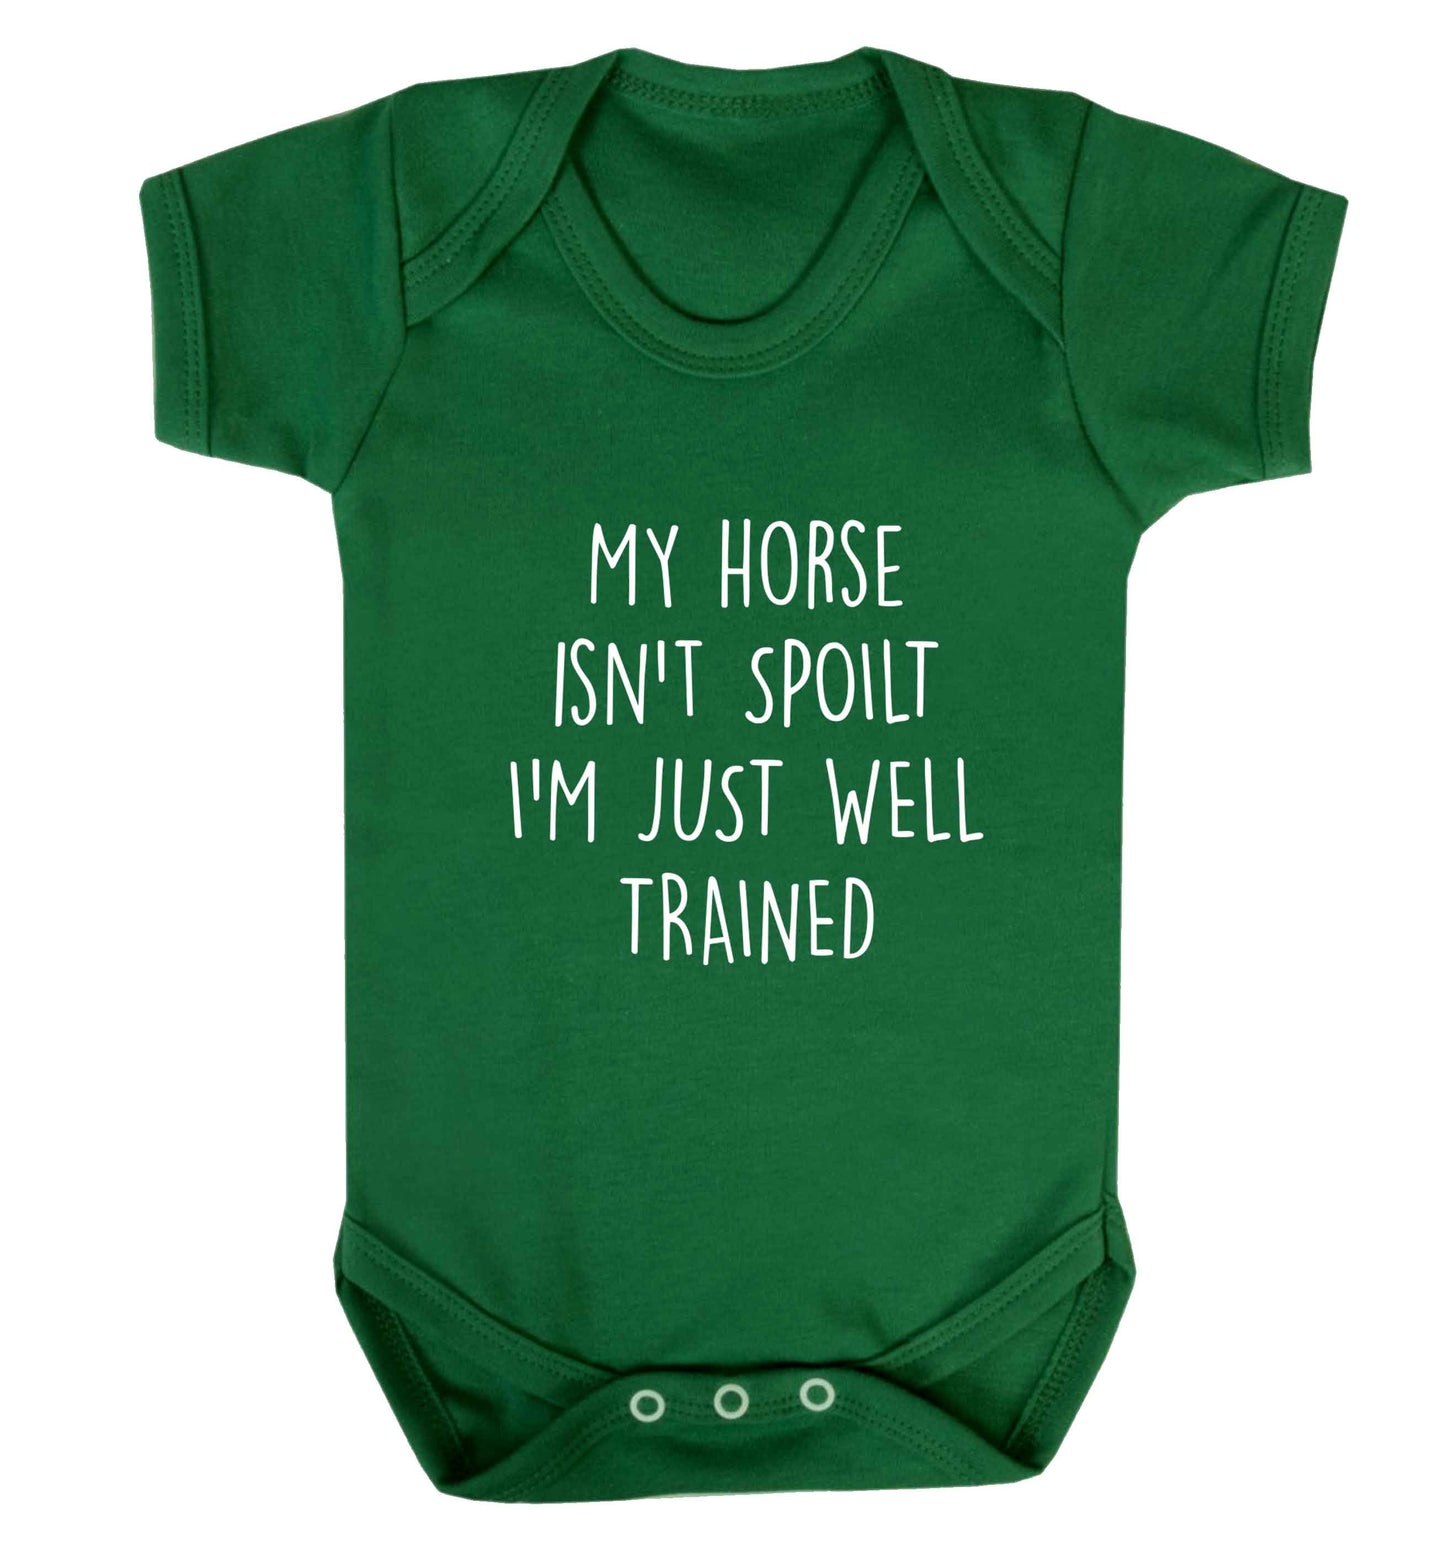 My horse isn't spoilt I'm just well trained baby vest green 18-24 months